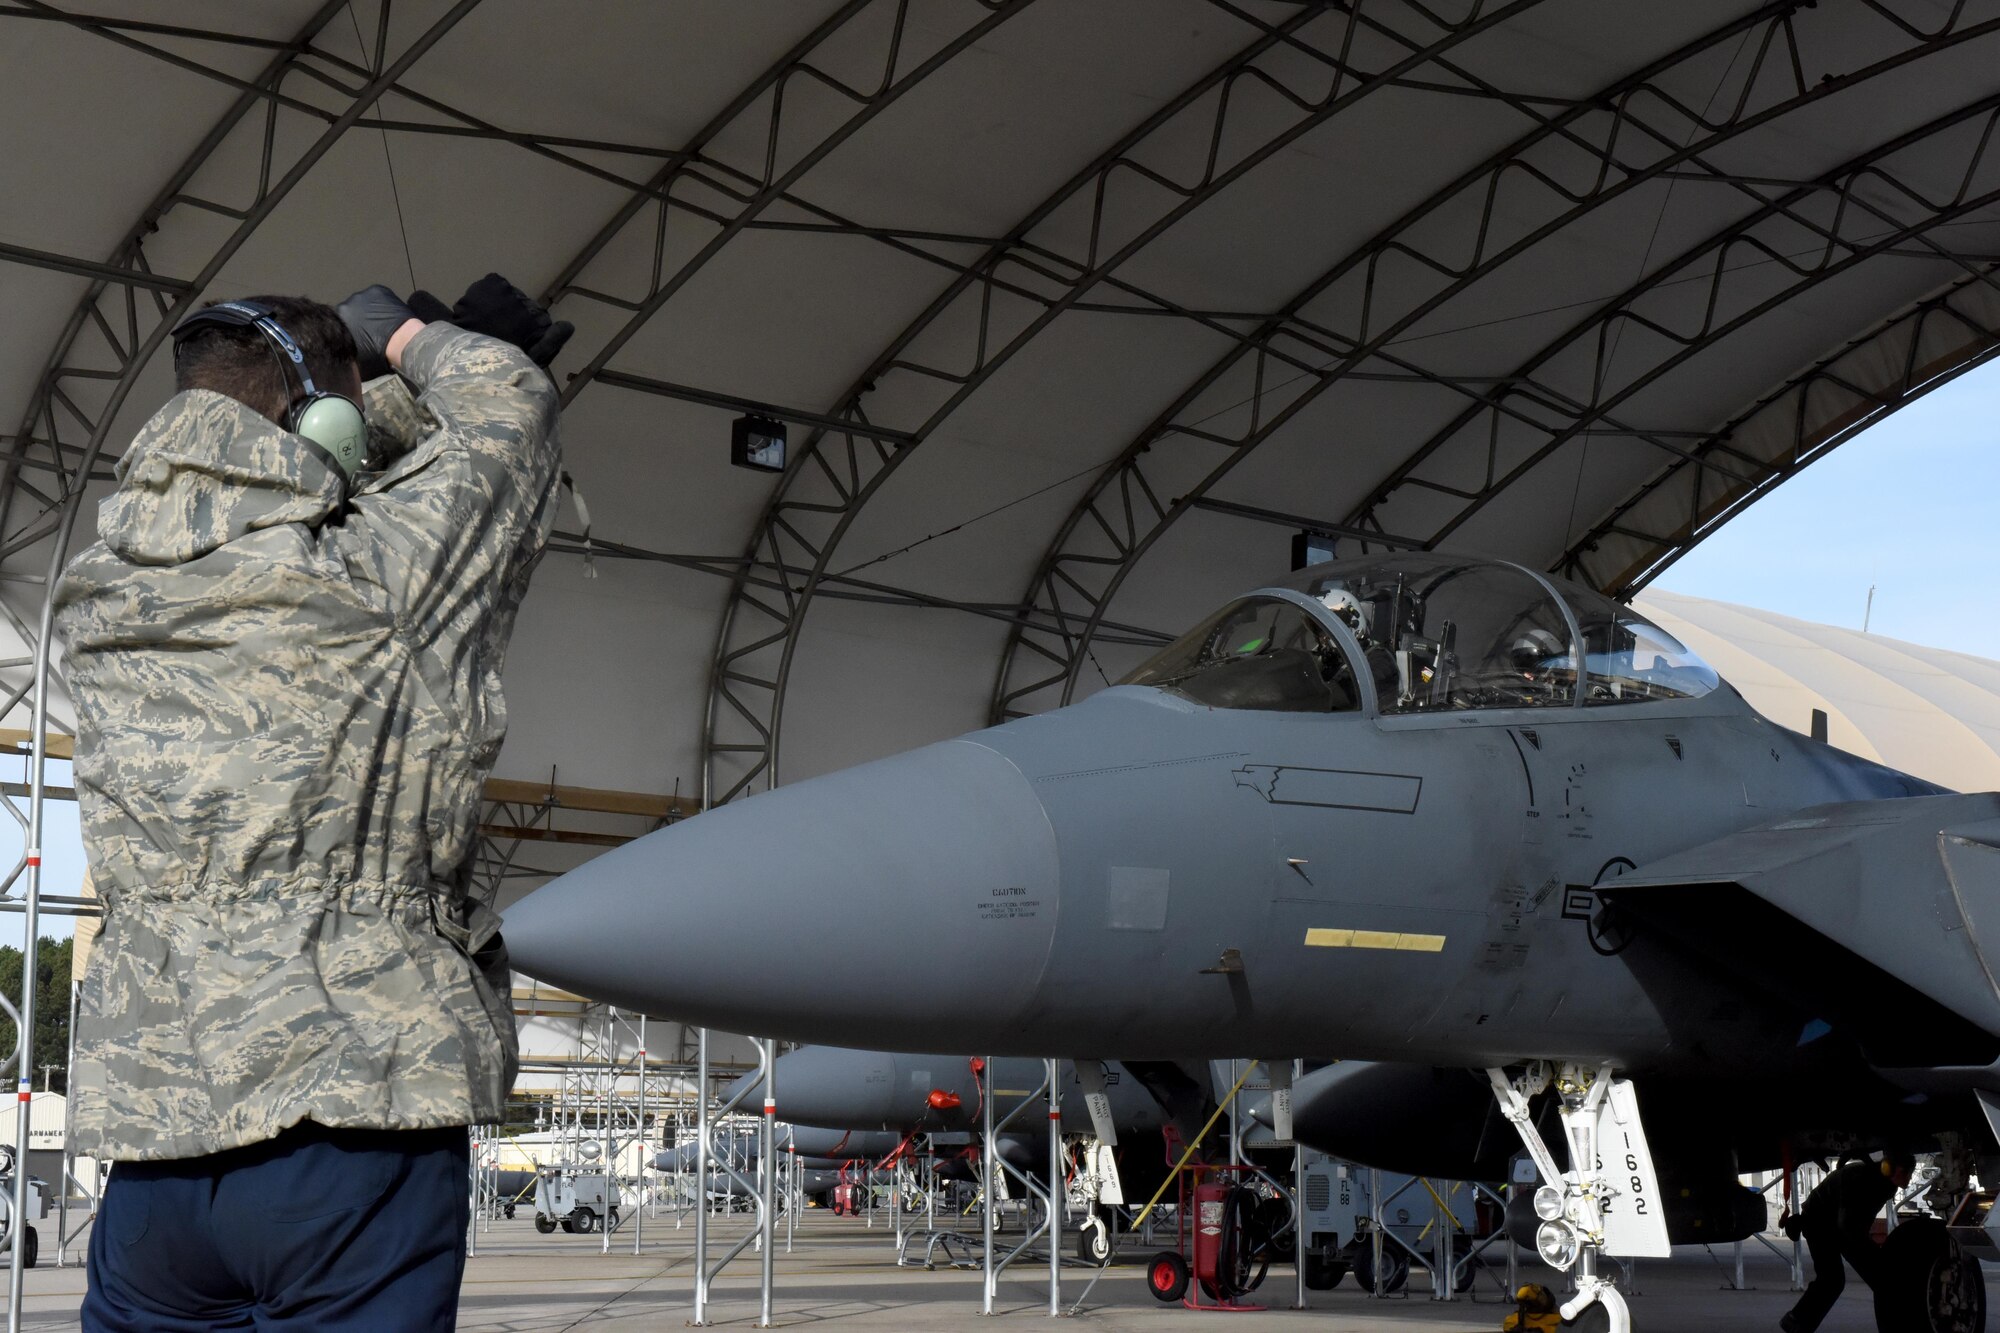 Airman 1st Class Nathan McDonald, 4th Aircraft Maintenance Squadron crew chief, marshals an F-15E Strike Eagle to participate in Razor Talon, Dec. 16, 2016, at Seymour Johnson Air Force Base, North Carolina. Razor Talon is an initiative developed by Seymour Johnson AFB to allow joint integration and training opportunities for every branch of the armed forces. (U.S. Air Force photo by Airman Miranda A. Loera)